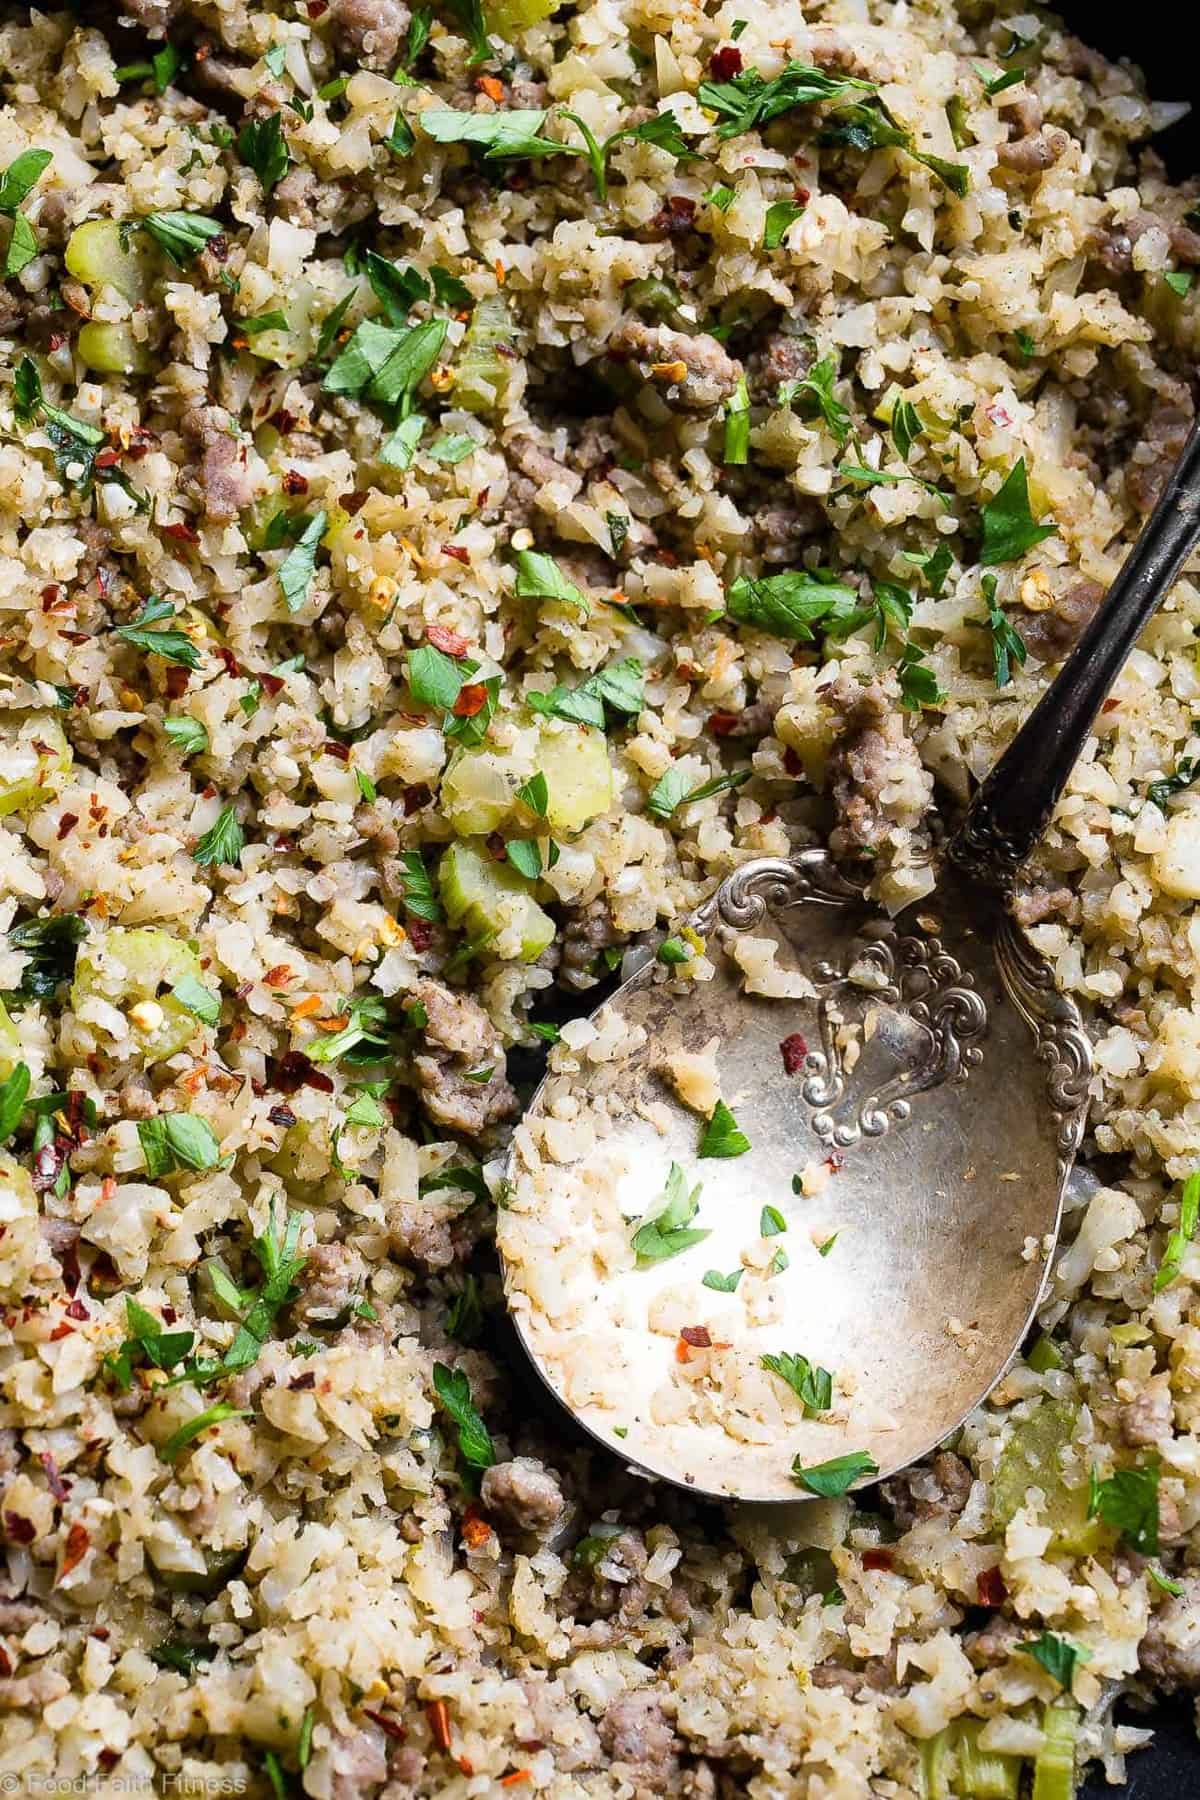 Low Carb Riced Cauliflower Keto Stuffing - This cauliflower rice stuffing is an EASY healthy holiday side that tastes like comfort food, but you won't miss the carbs! Paleo/whole30, only 150 calories and 3 SmartPoints! | #Foodfaithfitness | #Glutenfree #Paleo #Lowcarb #Keto #Whole30